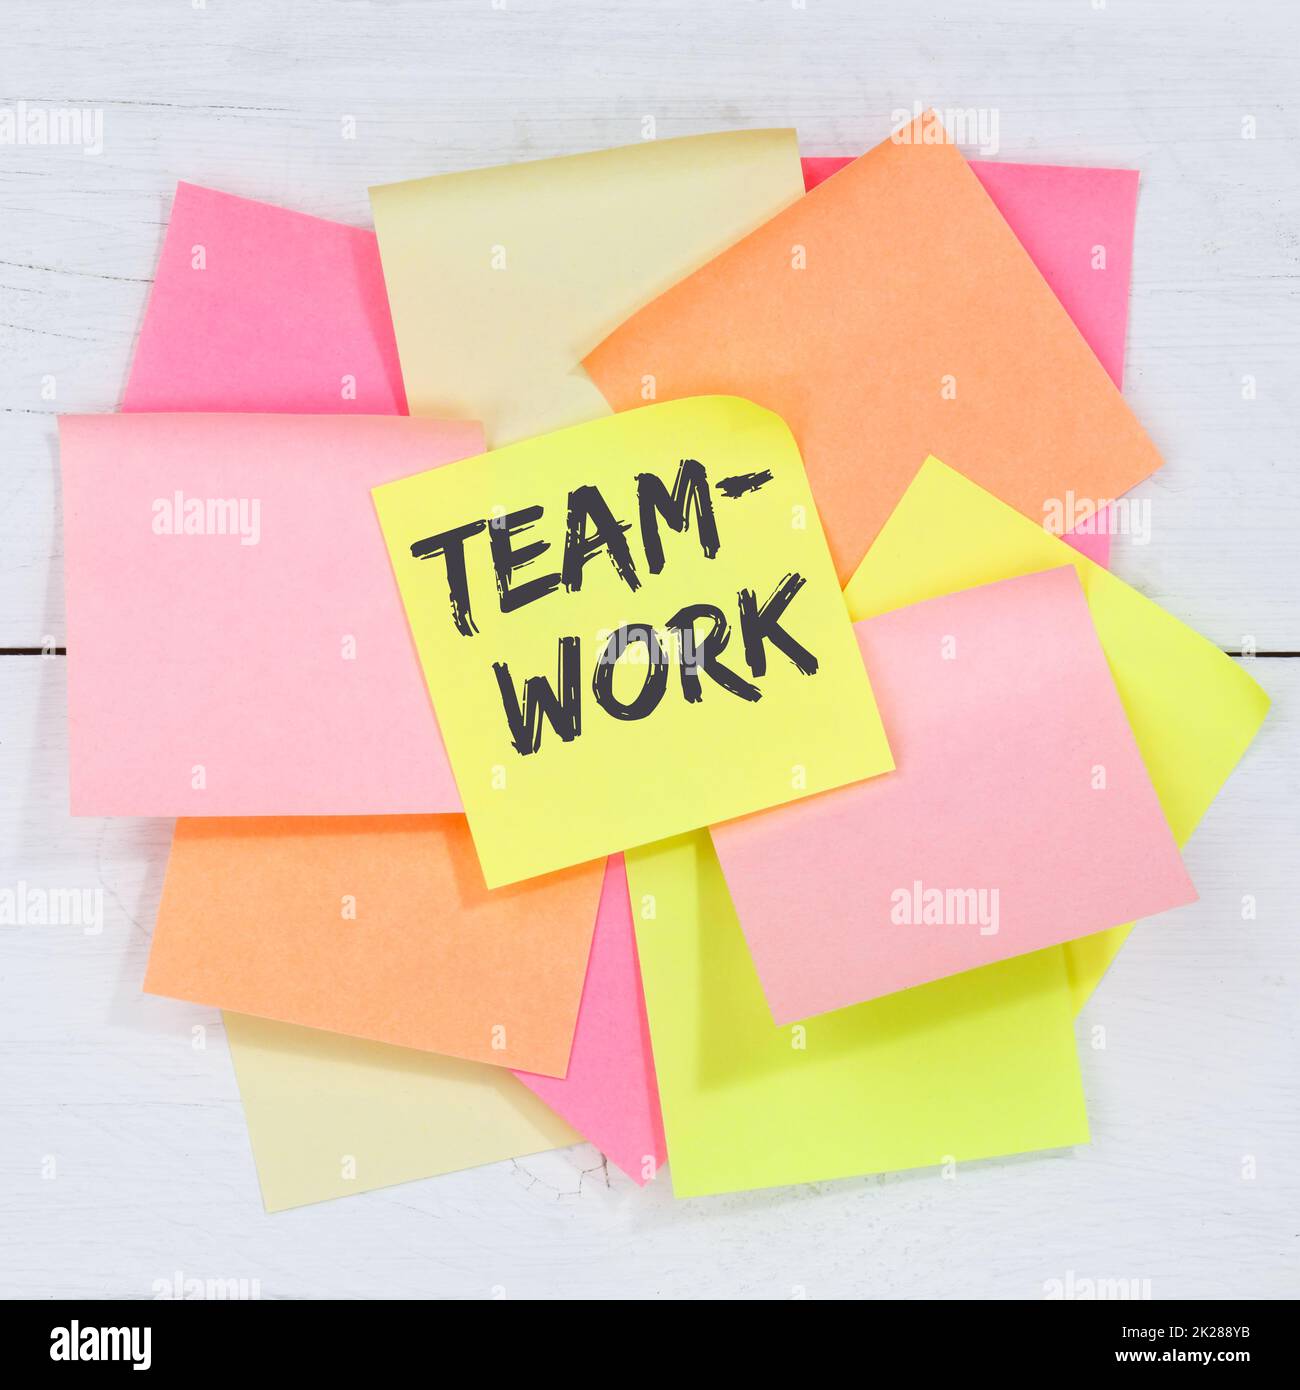 Teamwork team working together business concept desk note paper Stock Photo